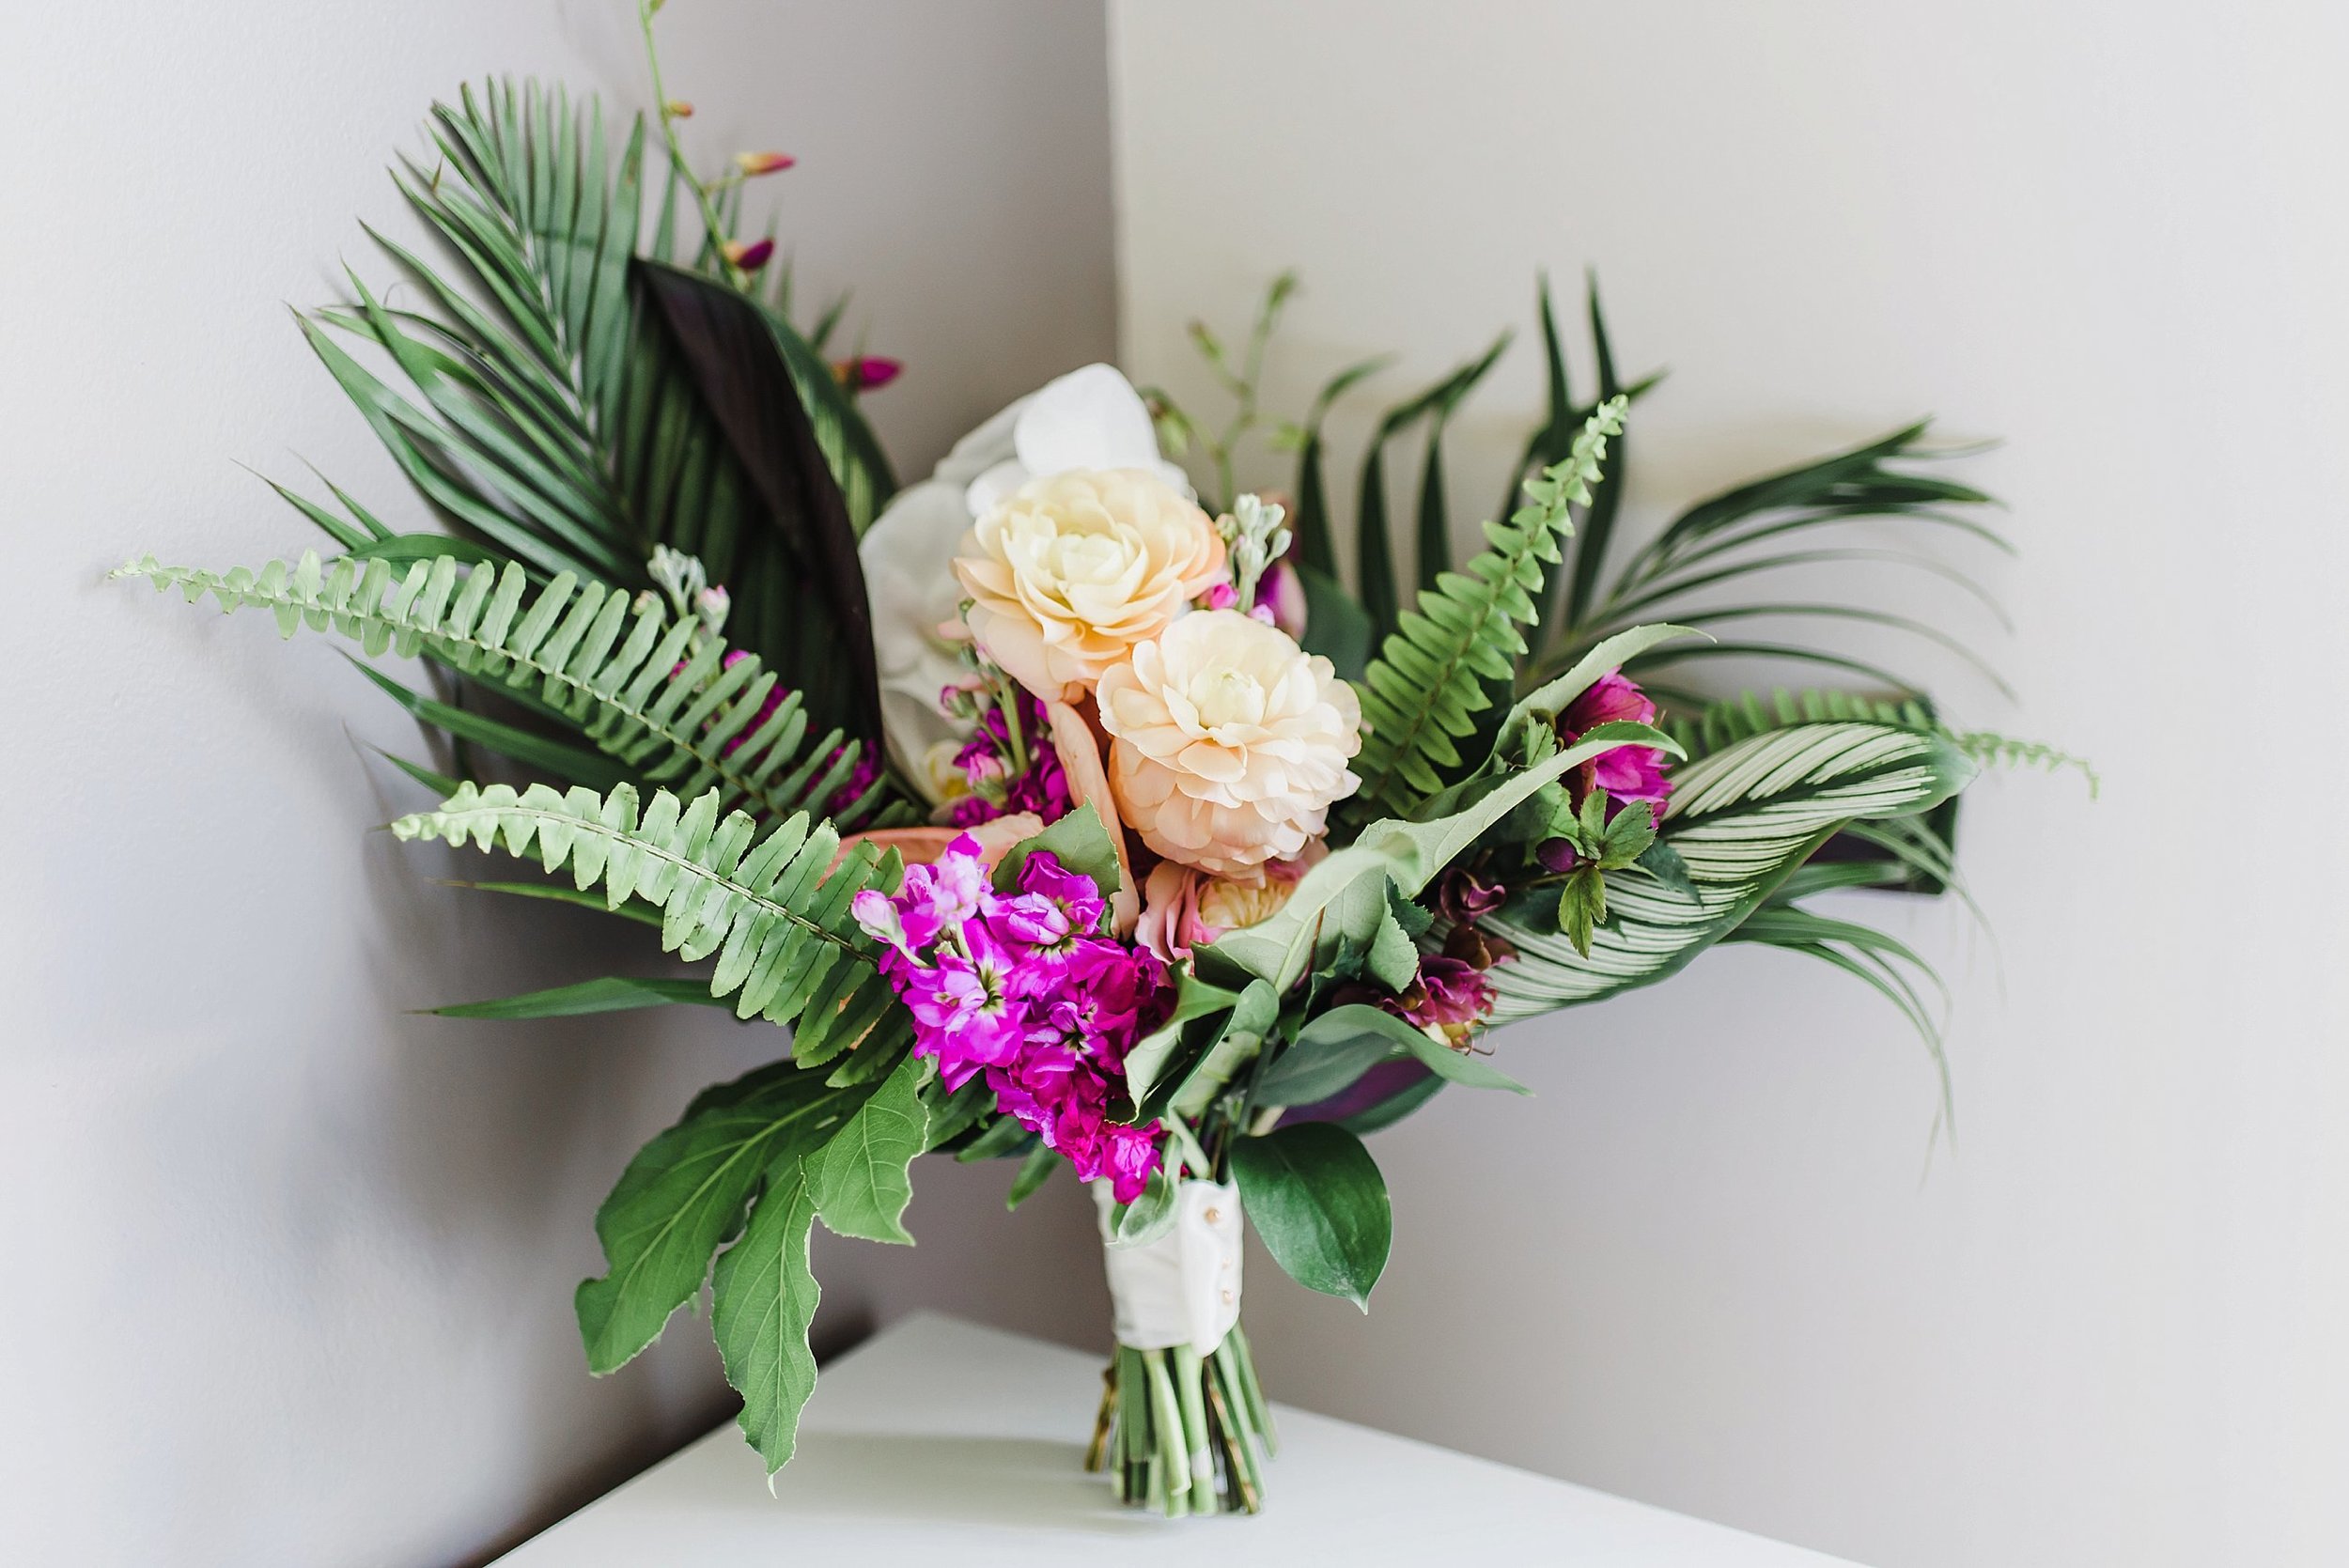  They brought a Caribbean flavour to their wedding design by incorporating tropical greenery and florals to the bridal bouquet. 